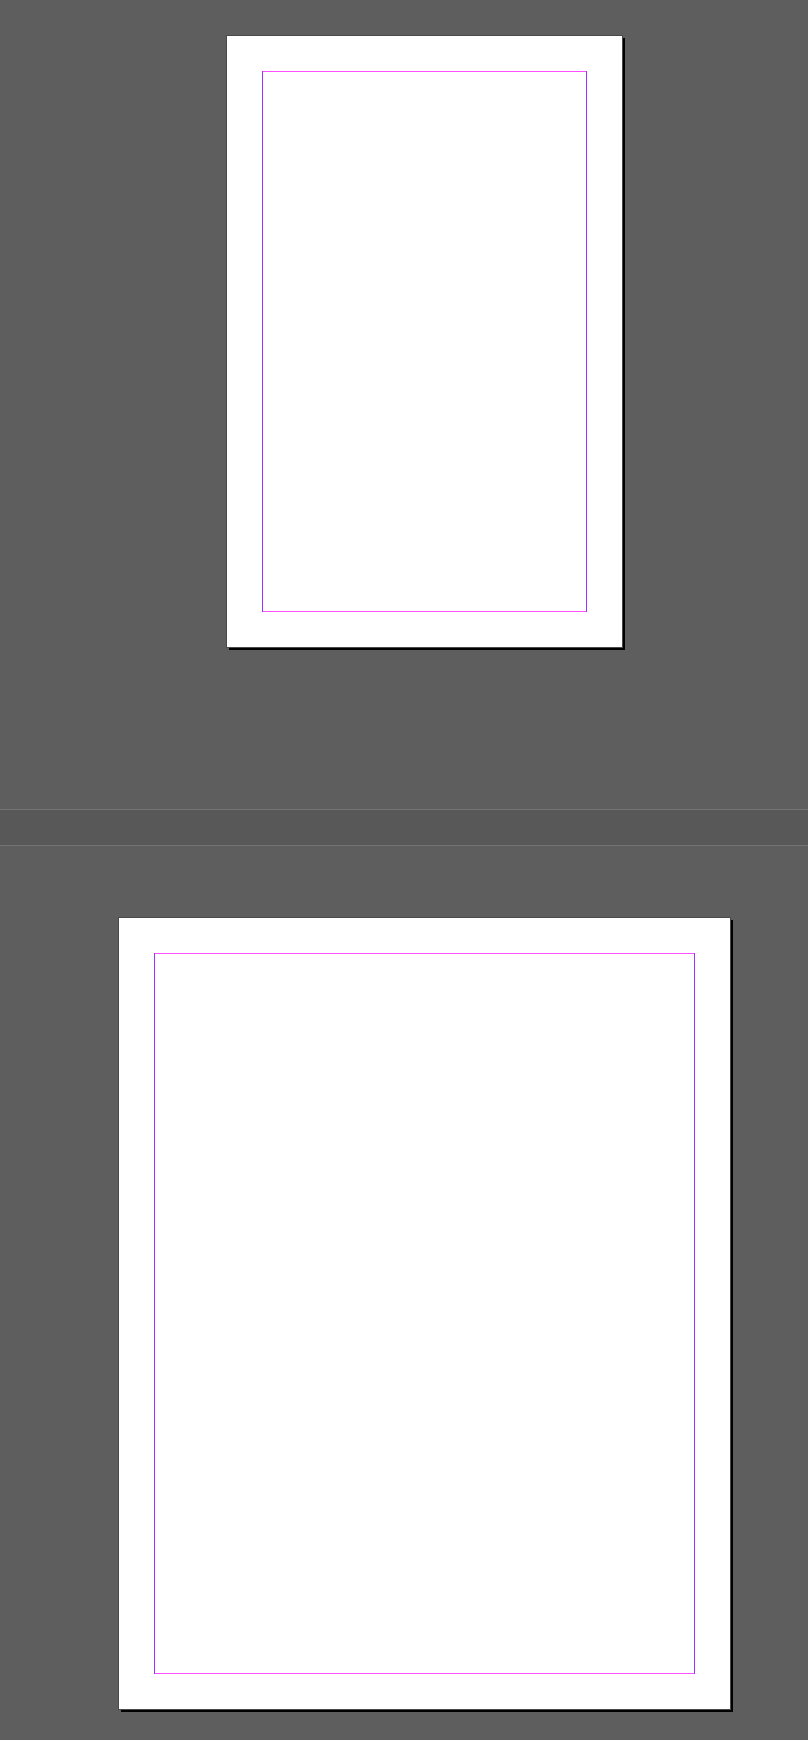 Indesign CC: How To Get Multiple Page Sizes